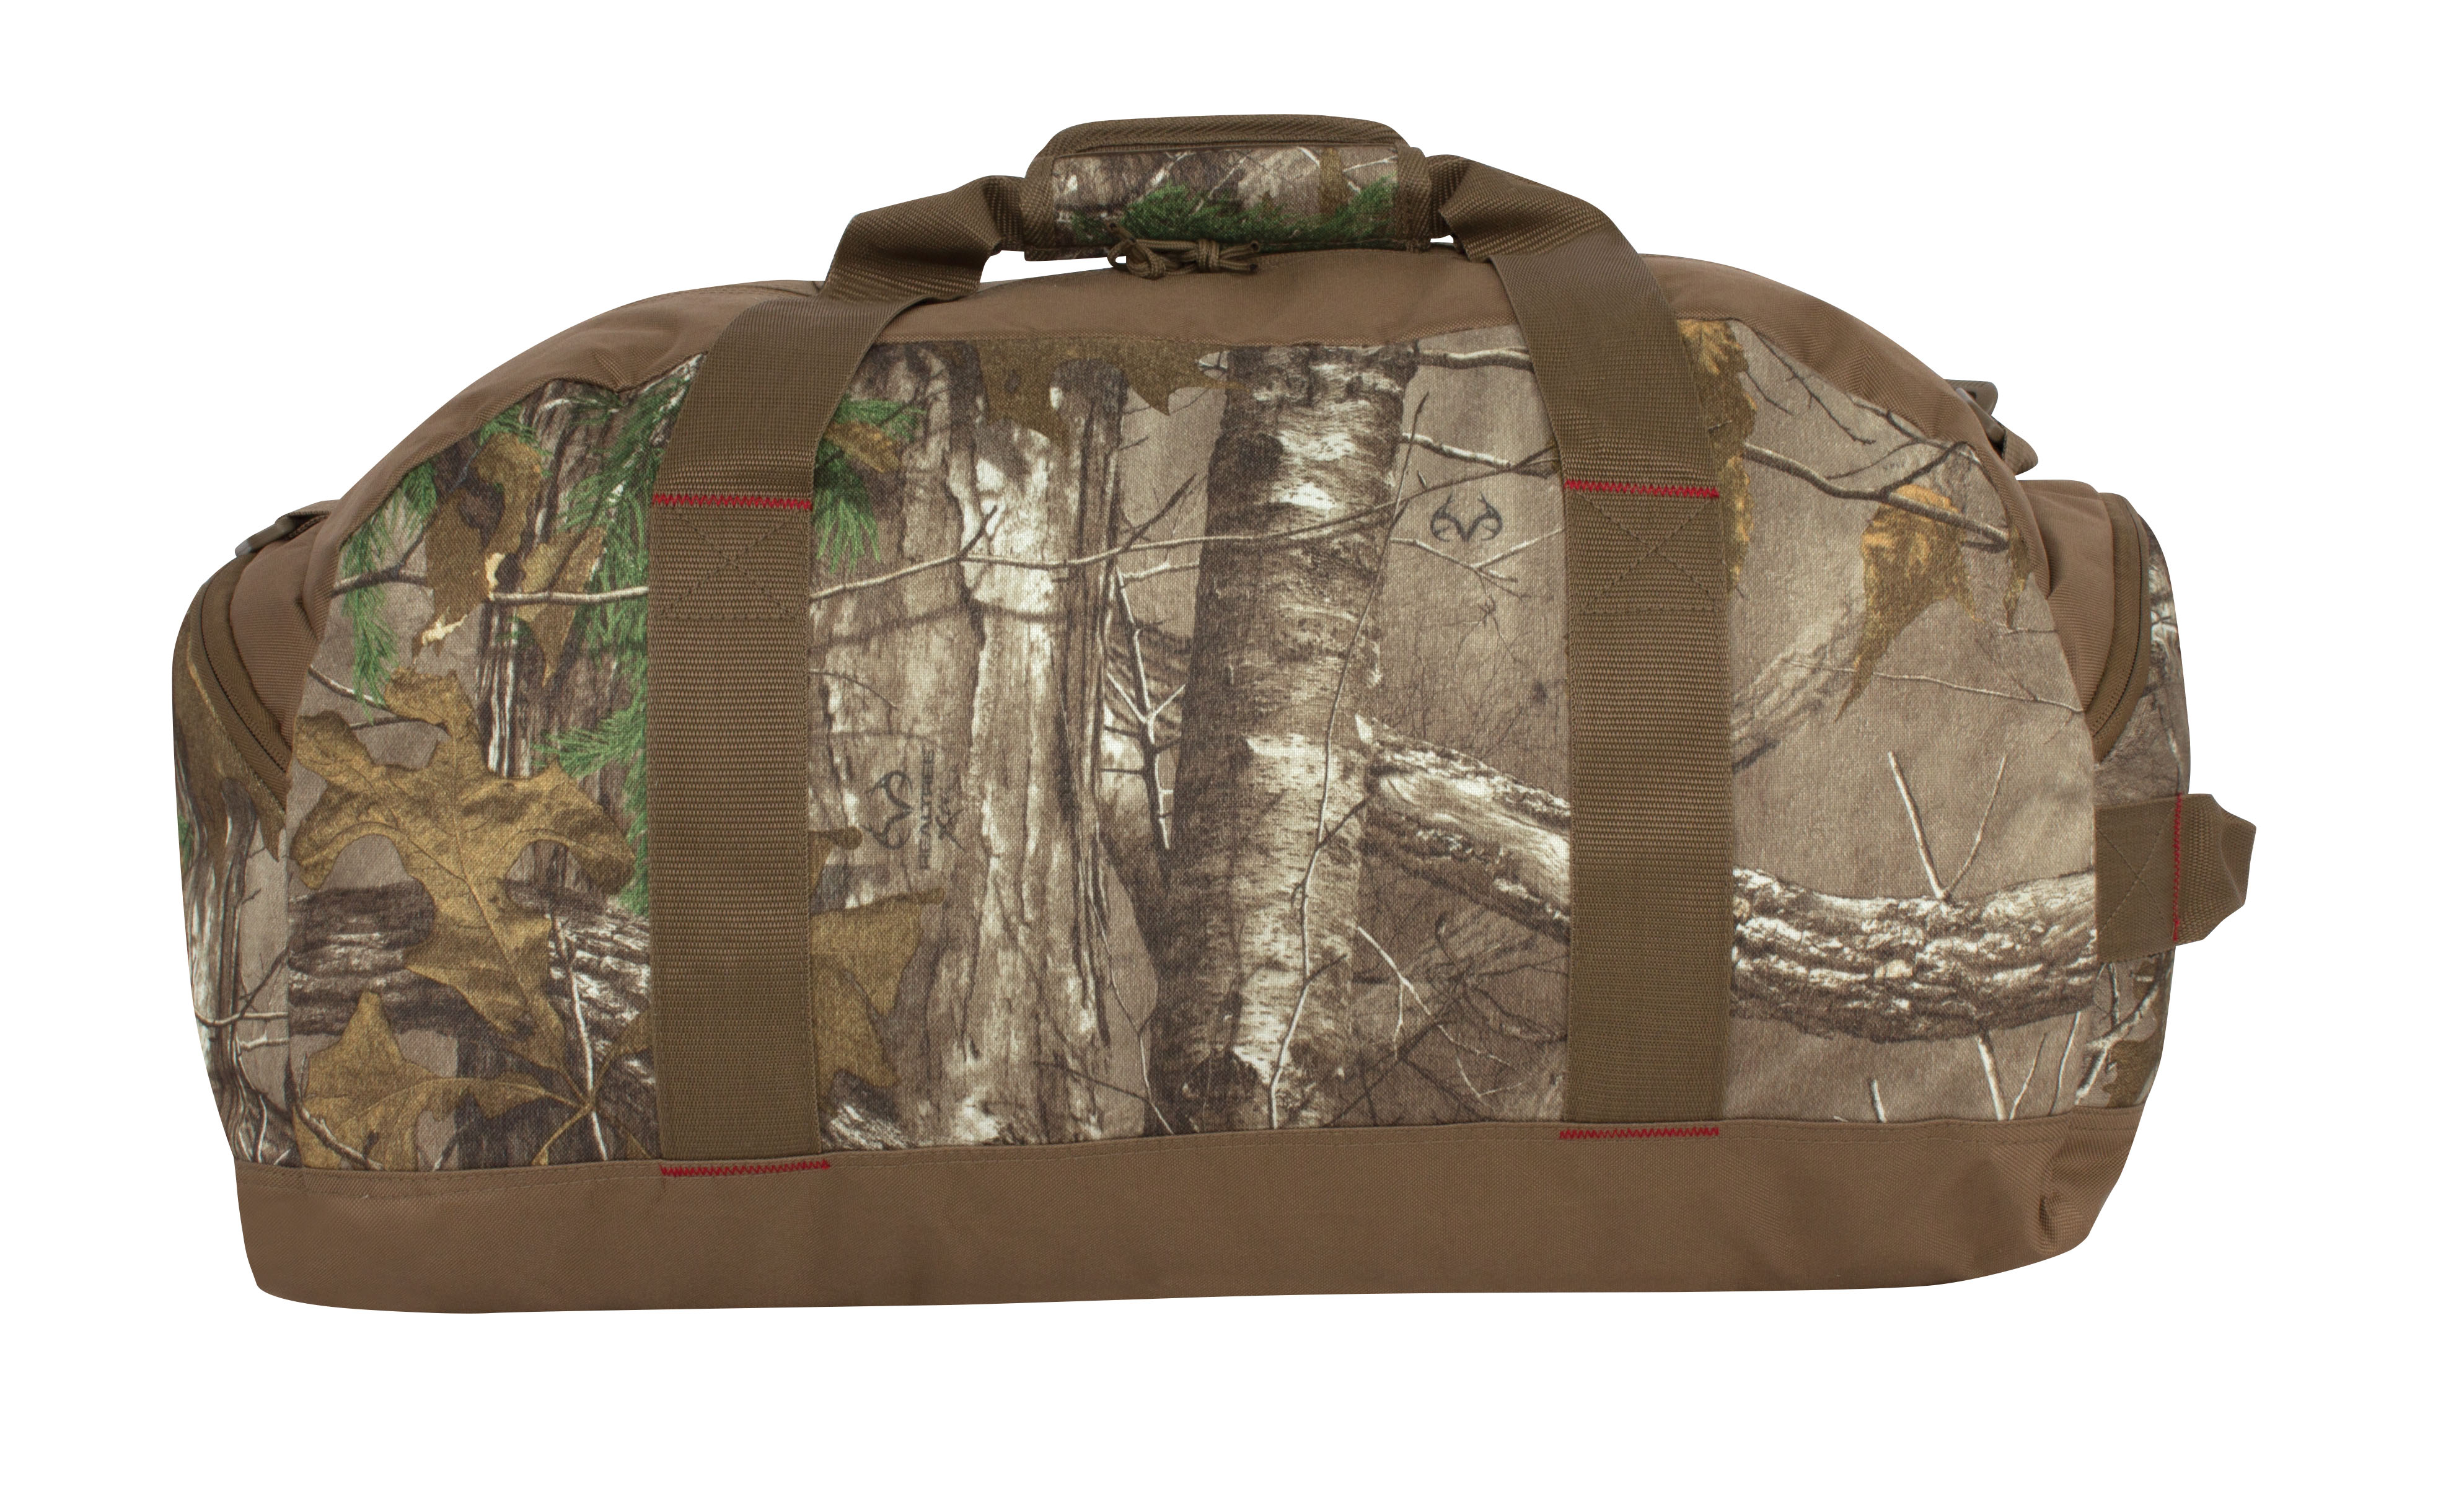 Winchester Large Utility Field Duffle Bag Realtree Hunting Camping Travel 7C4